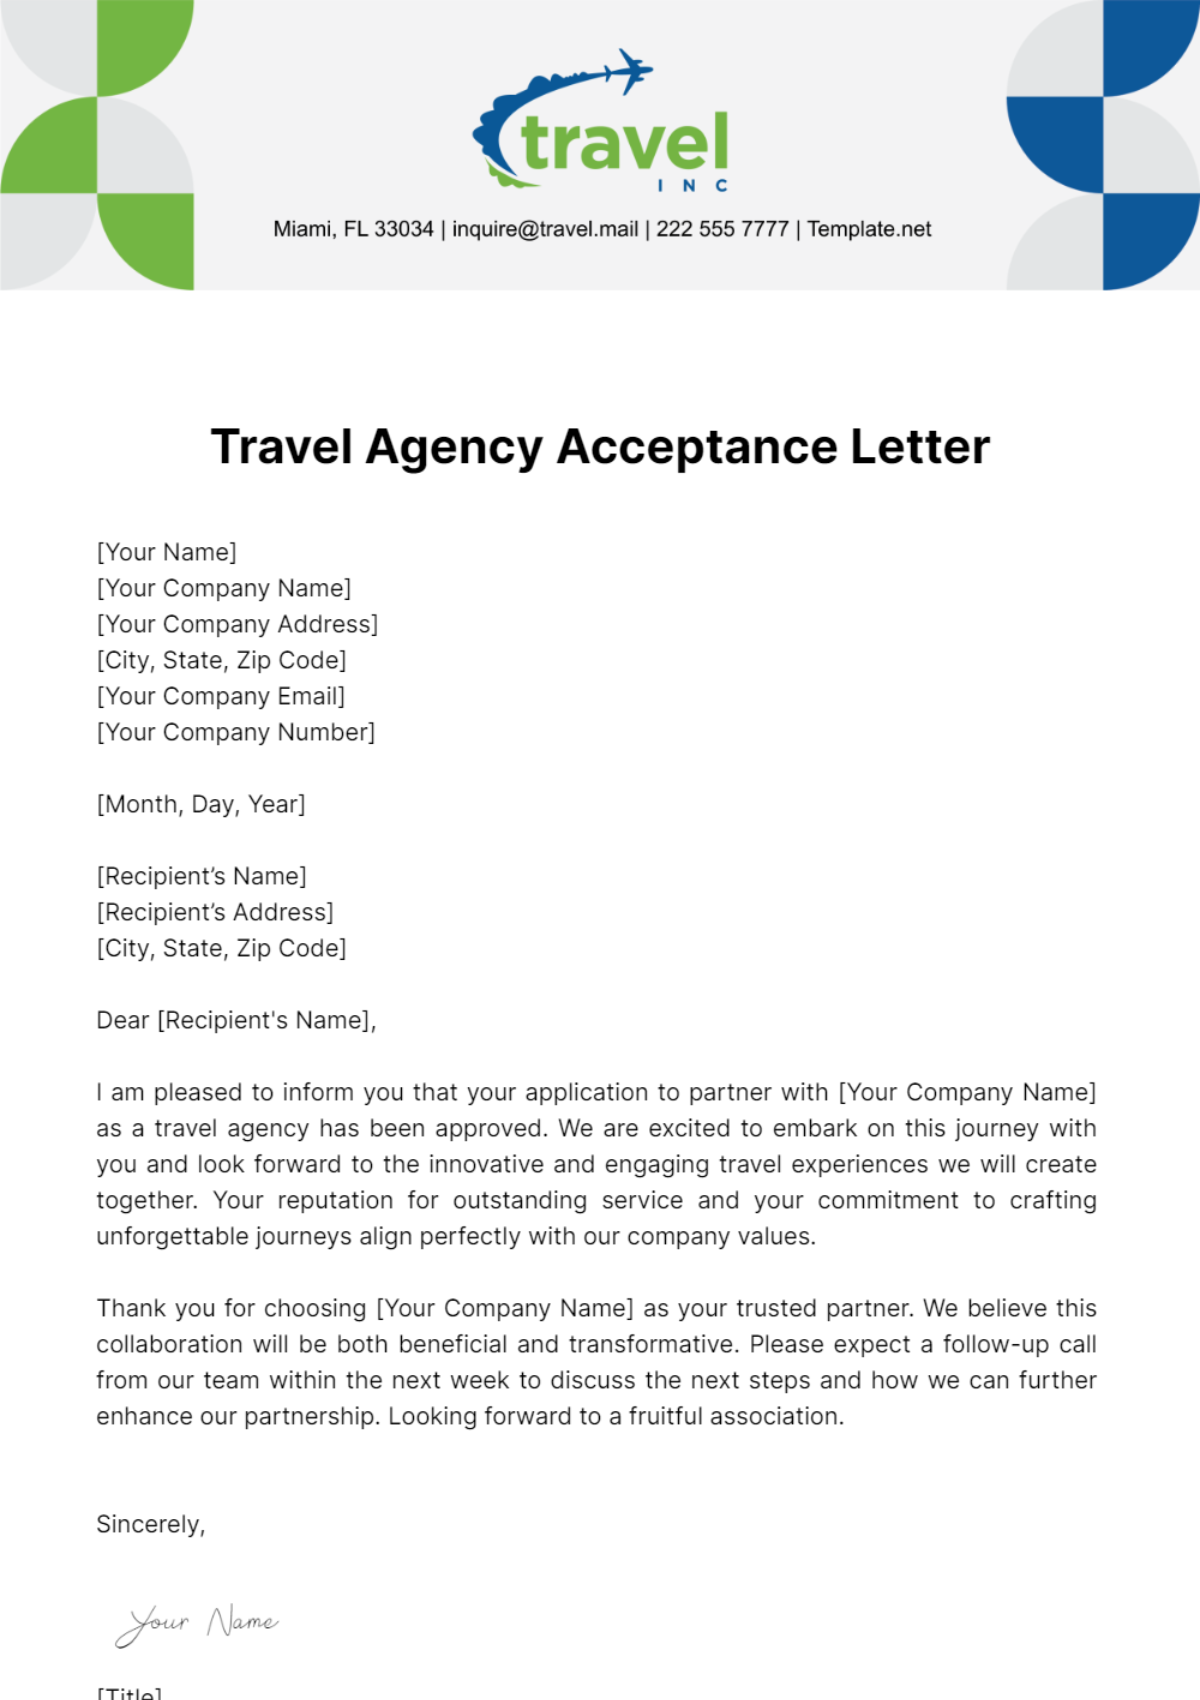 Free Travel Agency Acceptance Letter Template